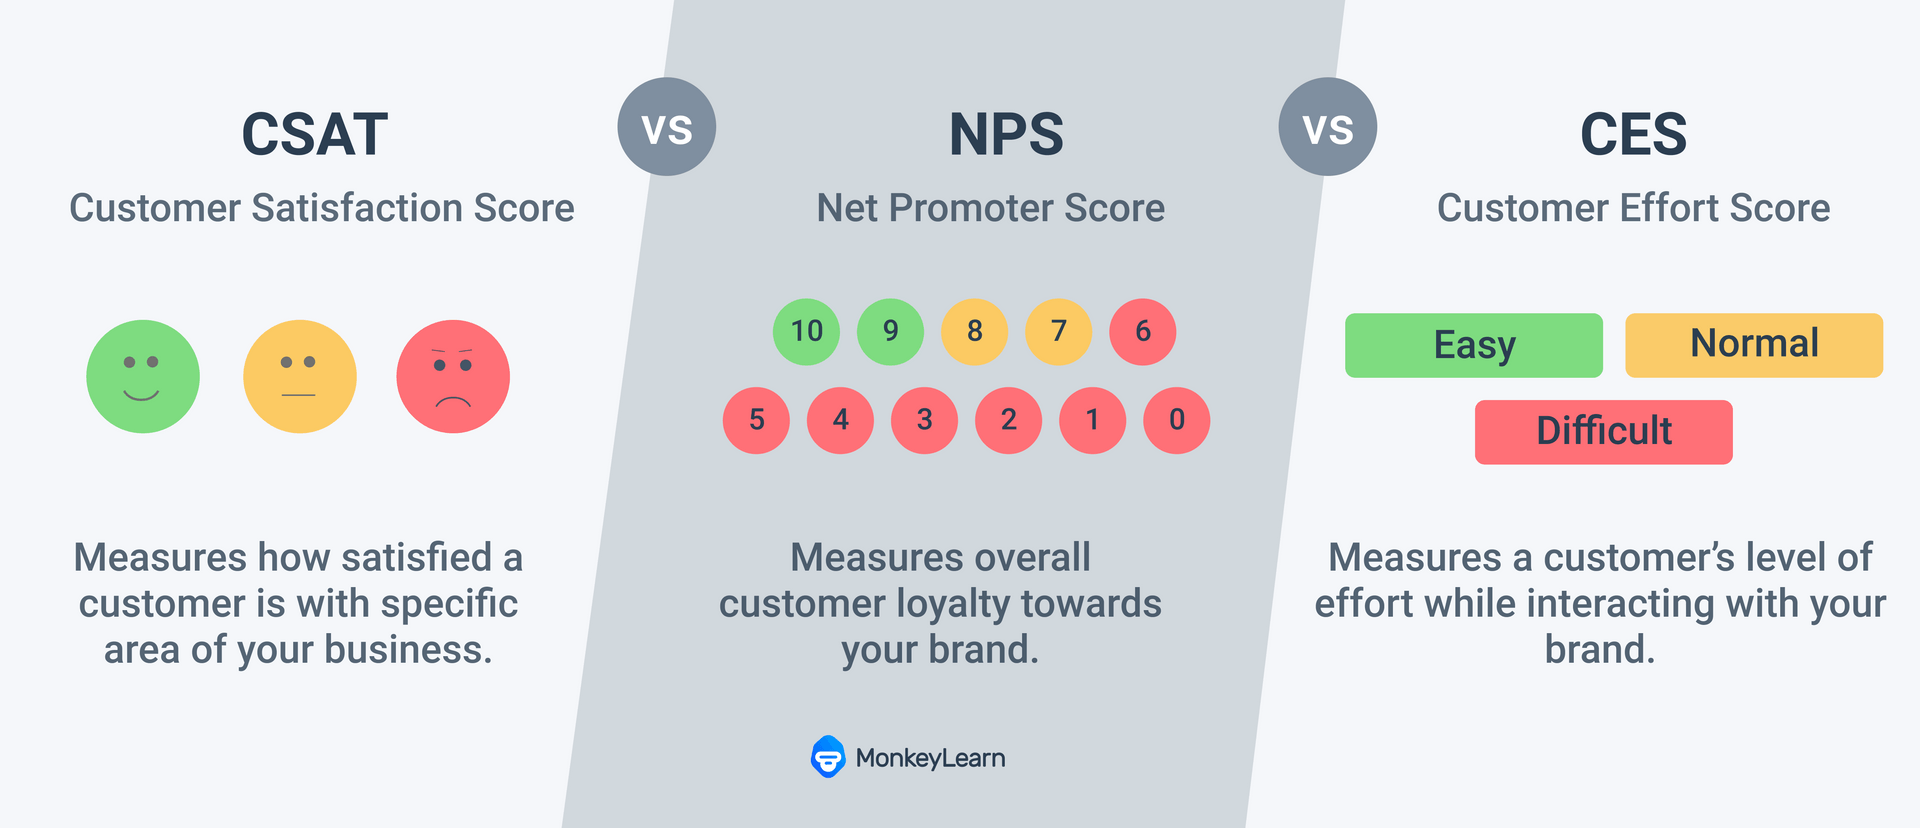 CSAT vs NPS vs . CSAT measures customer satisfaction in one specific area. NPS measures overall customer loyalty to your brand